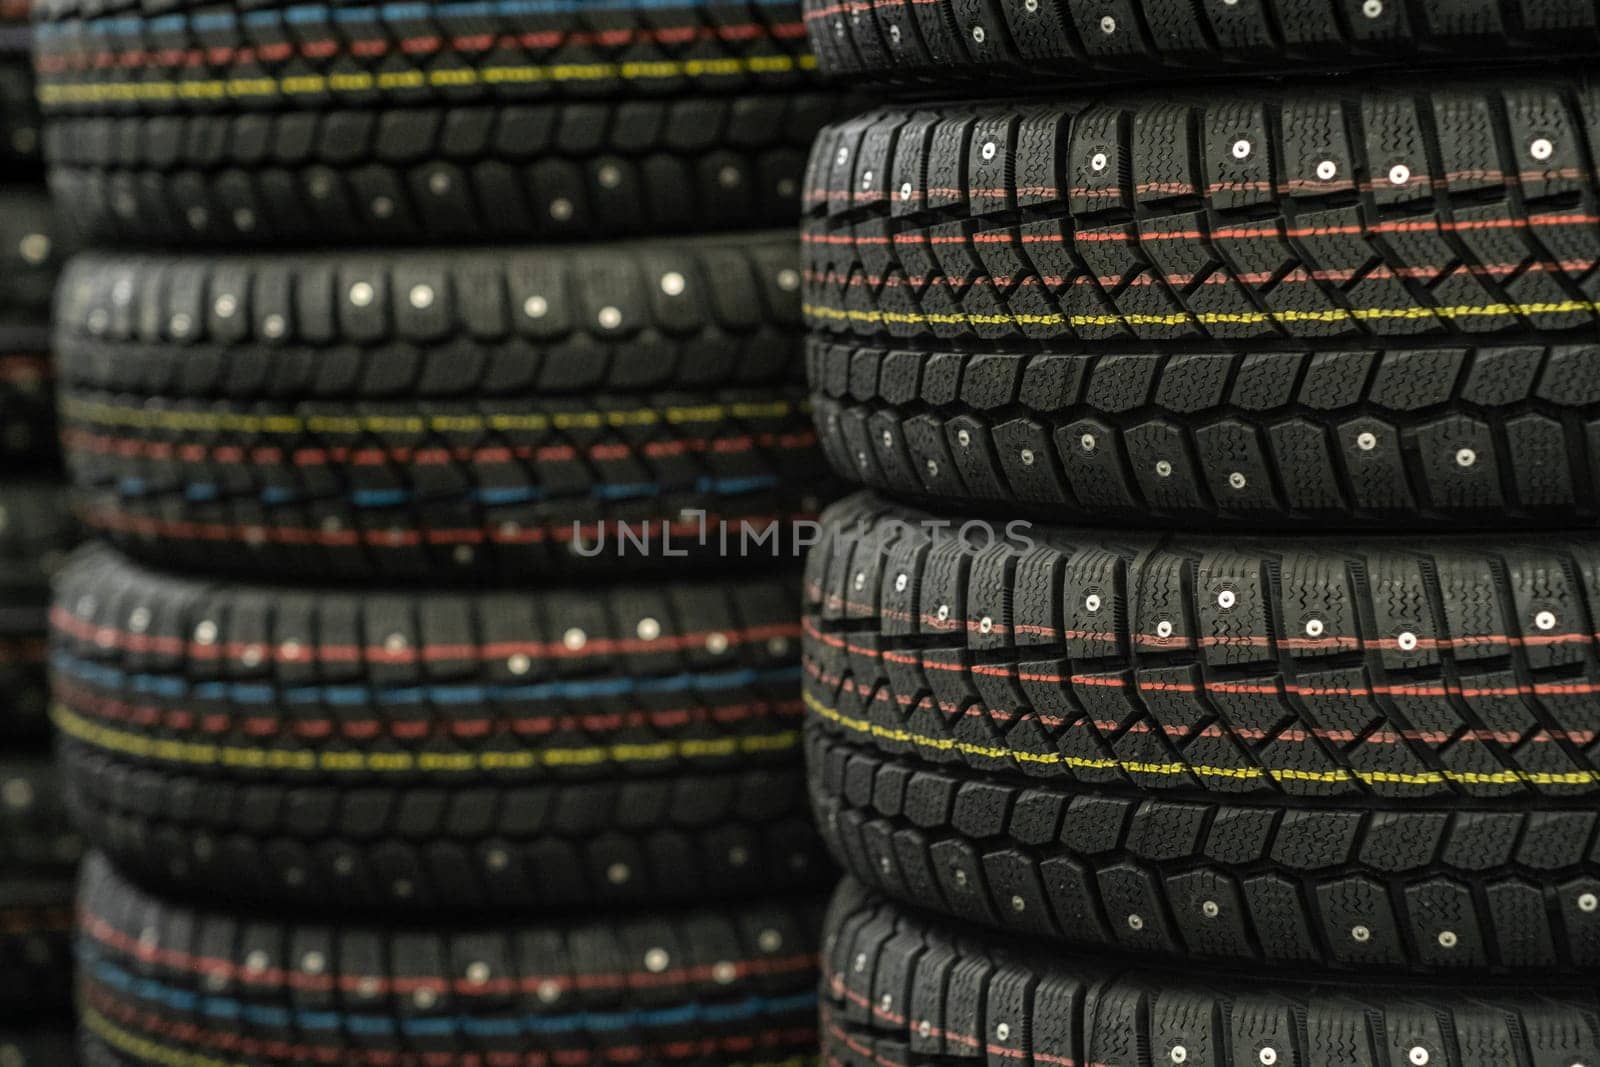 Sale of car tires for sale in the store. Many new winter tires lie horizontally. There is space for text